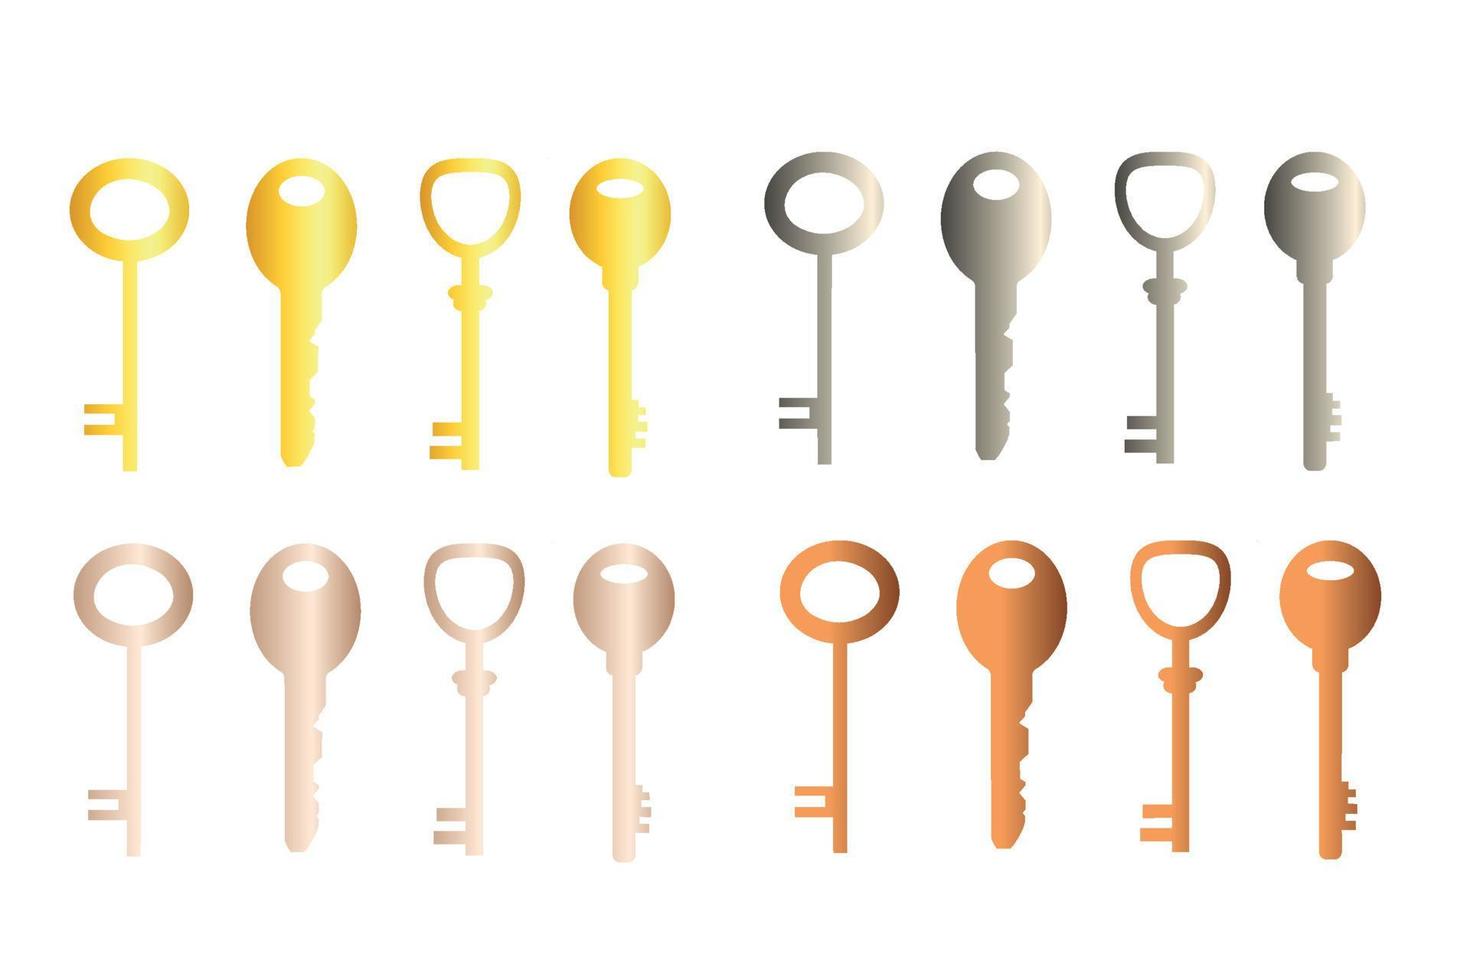 A set of metal keys. Vector illustration isolated on a white background